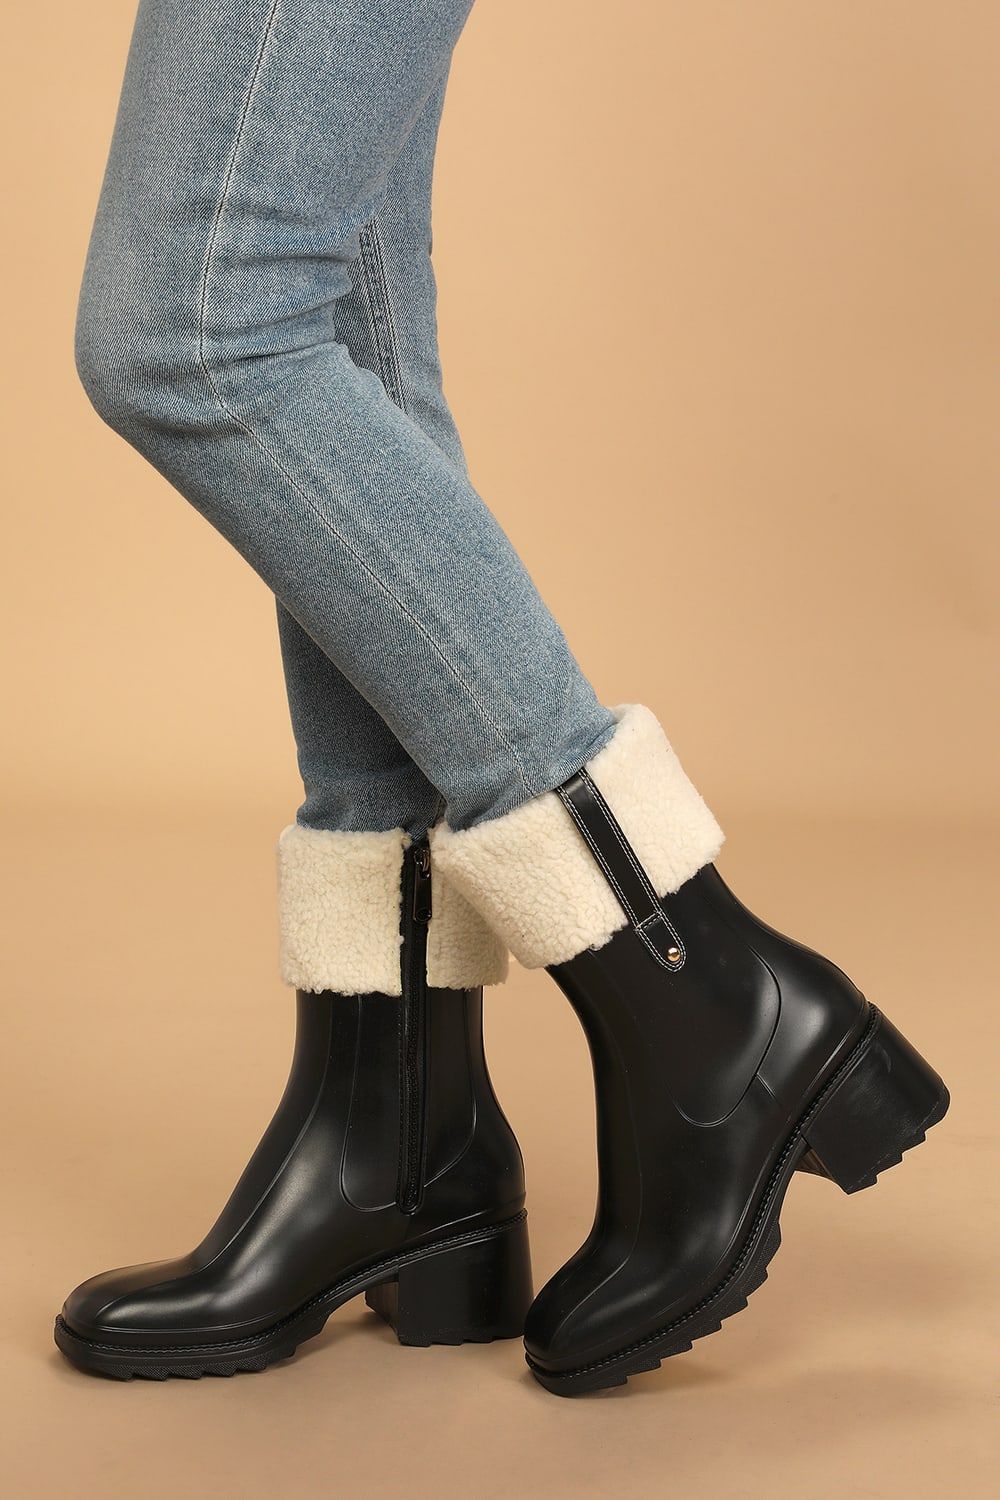 Chayy Black Faux Fur Mid-Calf Boots | Lulus (US)